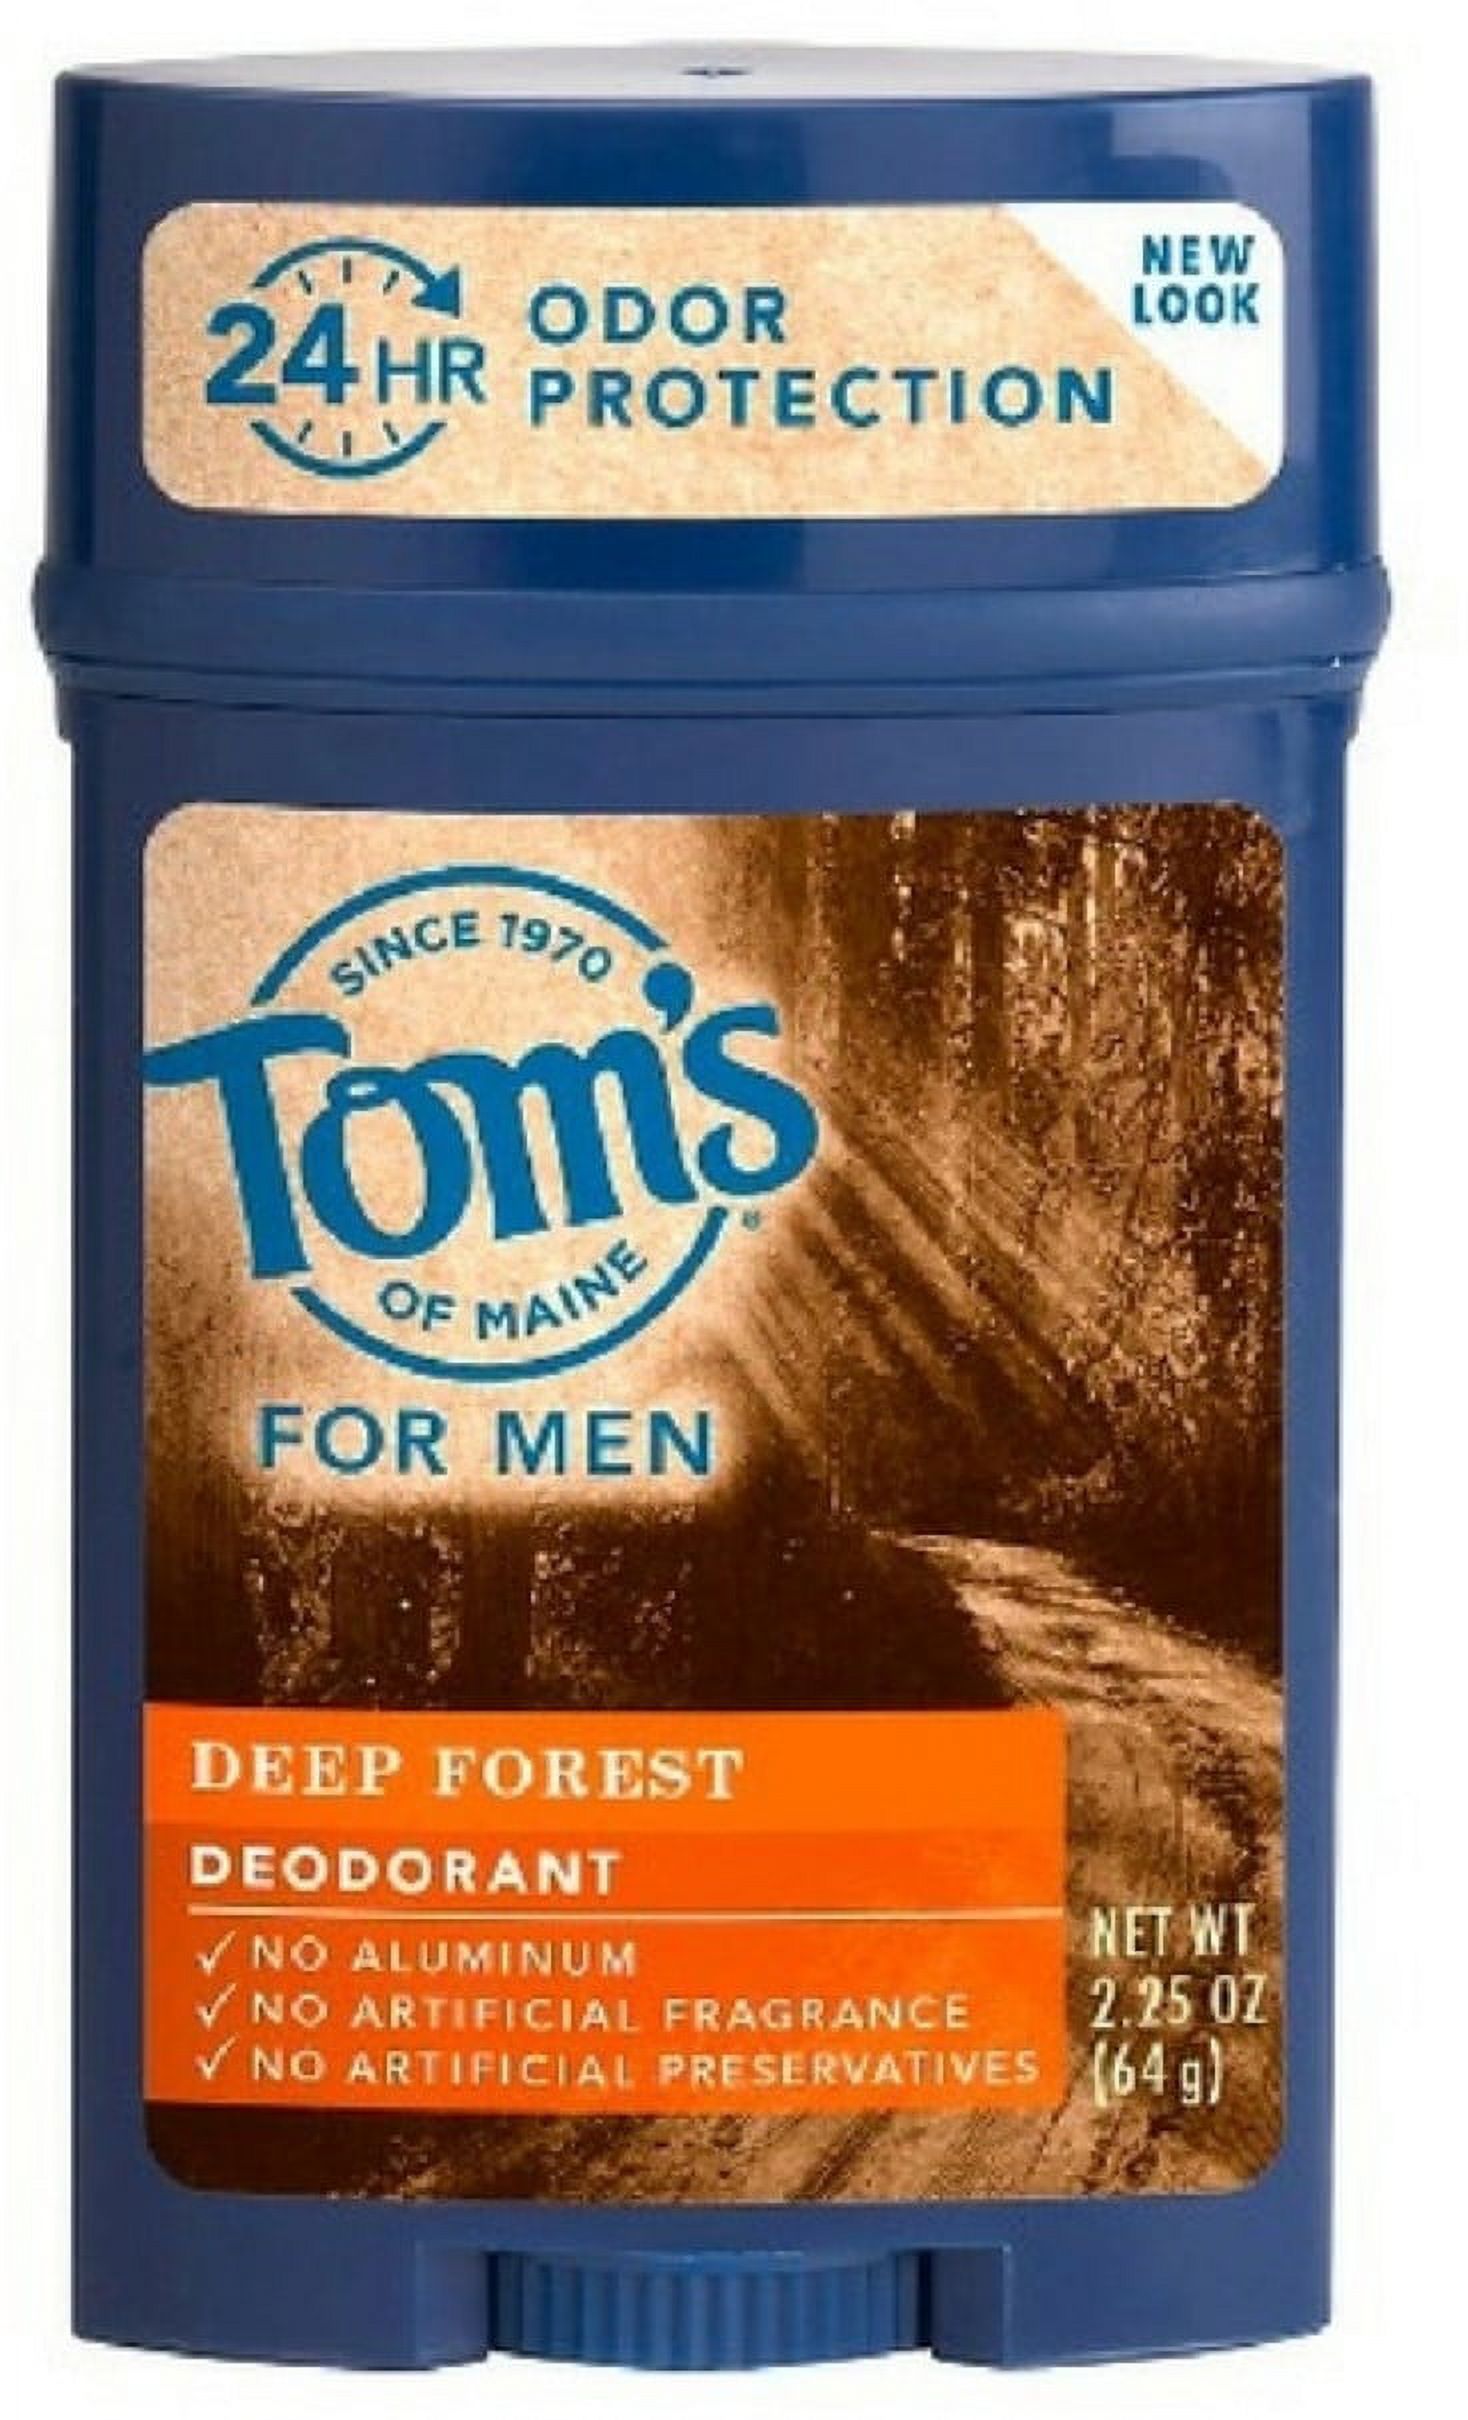 Tom's of Maine For Men Deep Forest Deodorant 2.25 oz - image 1 of 3